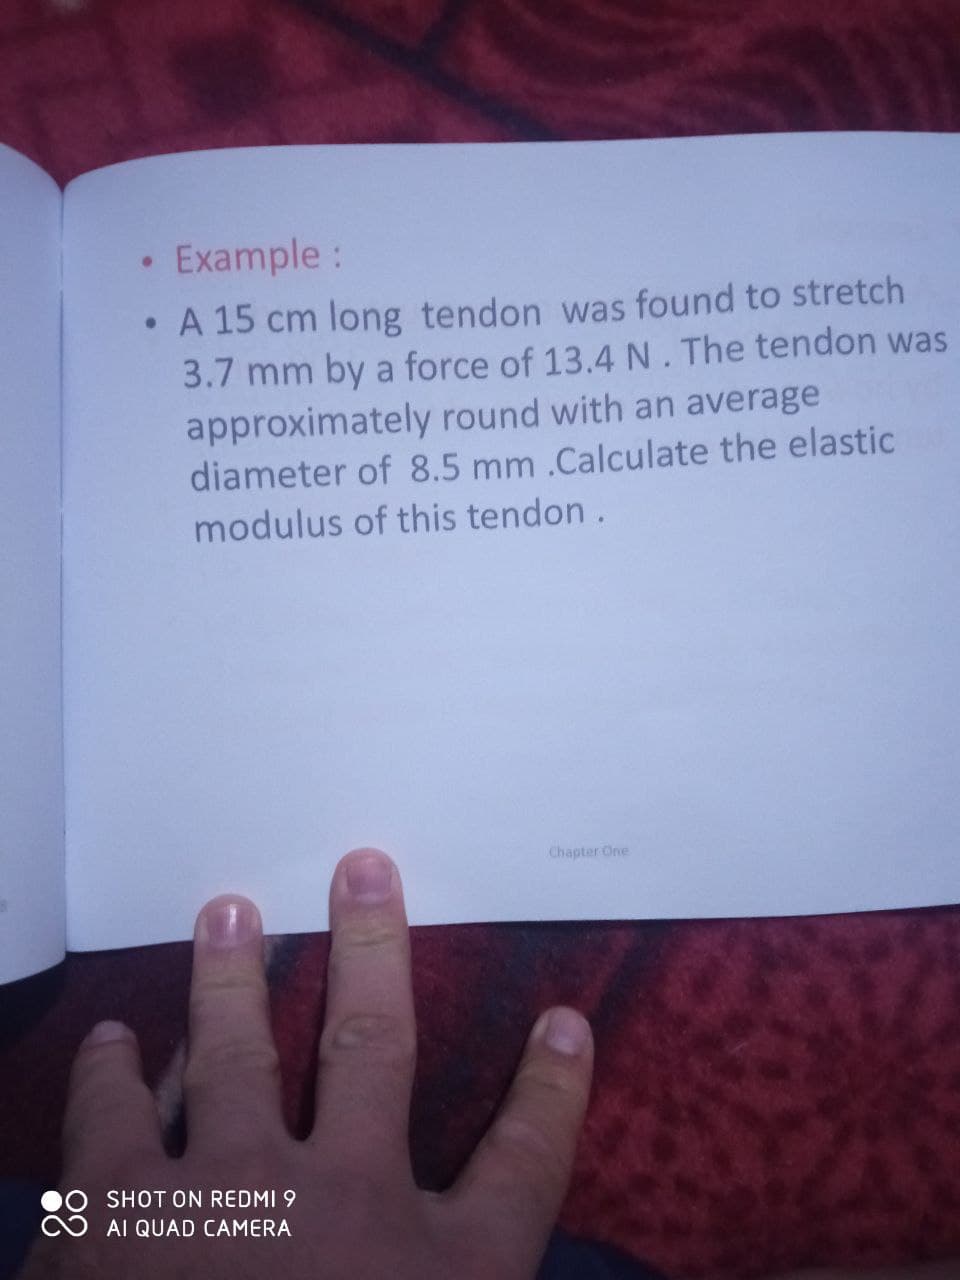 • Example:
A 15 cm long tendon was found to stretch
3.7 mm by a force of 13.4 N. The tendon was
approximately round with an average
diameter of 8.5 mm .Calculate the elastic
modulus of this tendon.
Chapter One
SHOT ON REDMI 9
AI QUAD CAMERA
